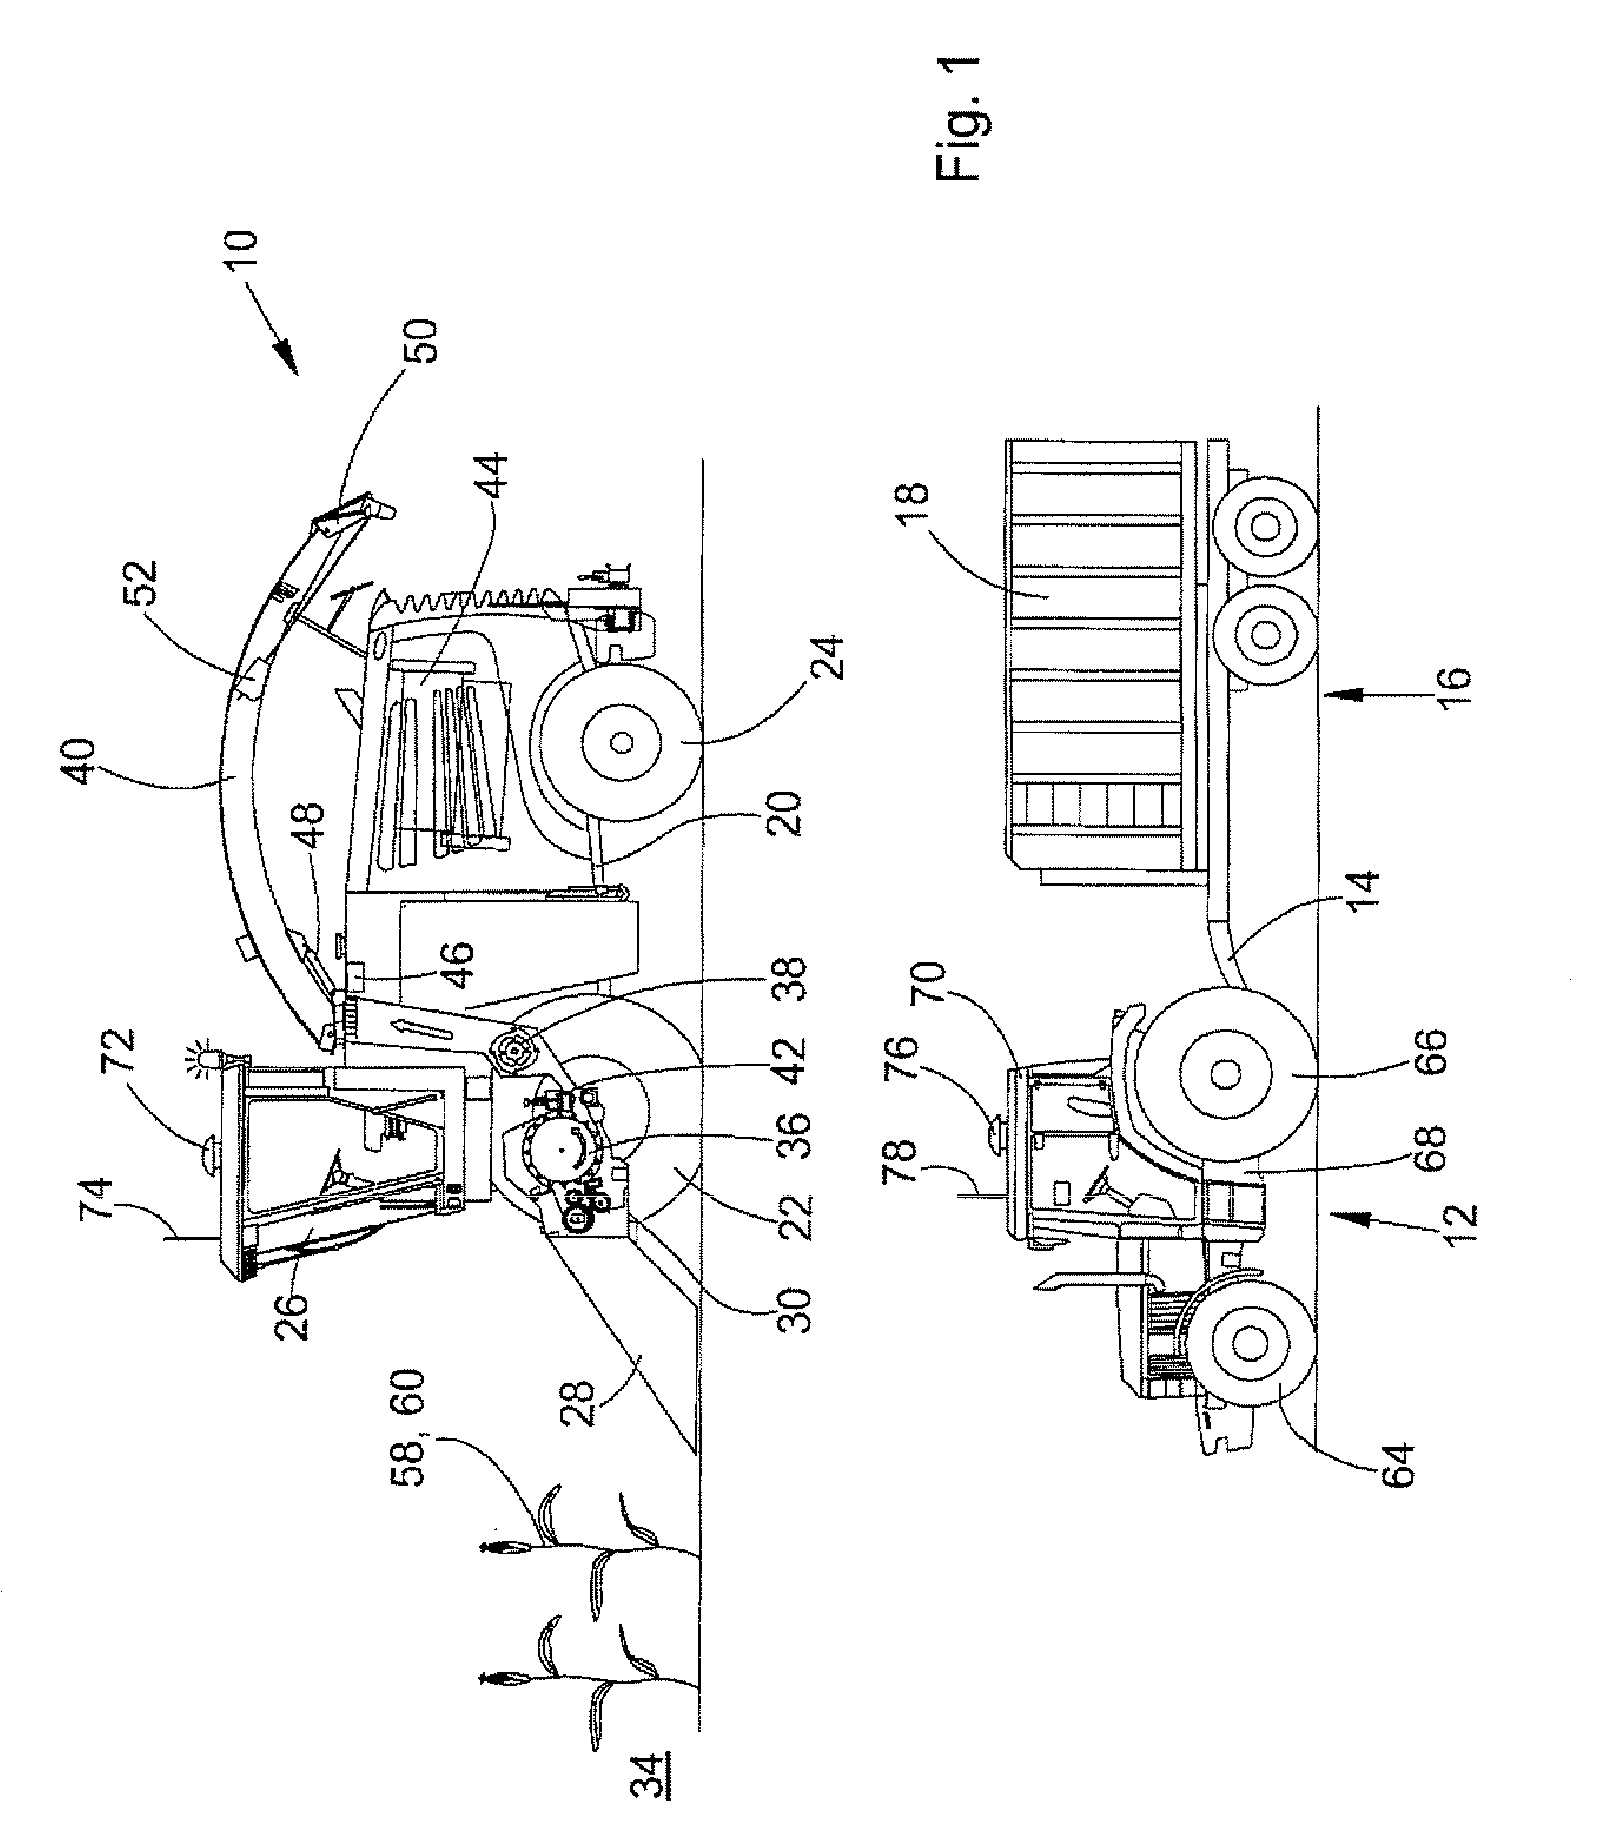 Control arrangement for controlling the transfer of agricultural crop from a harvesting machine to a transport vehicle